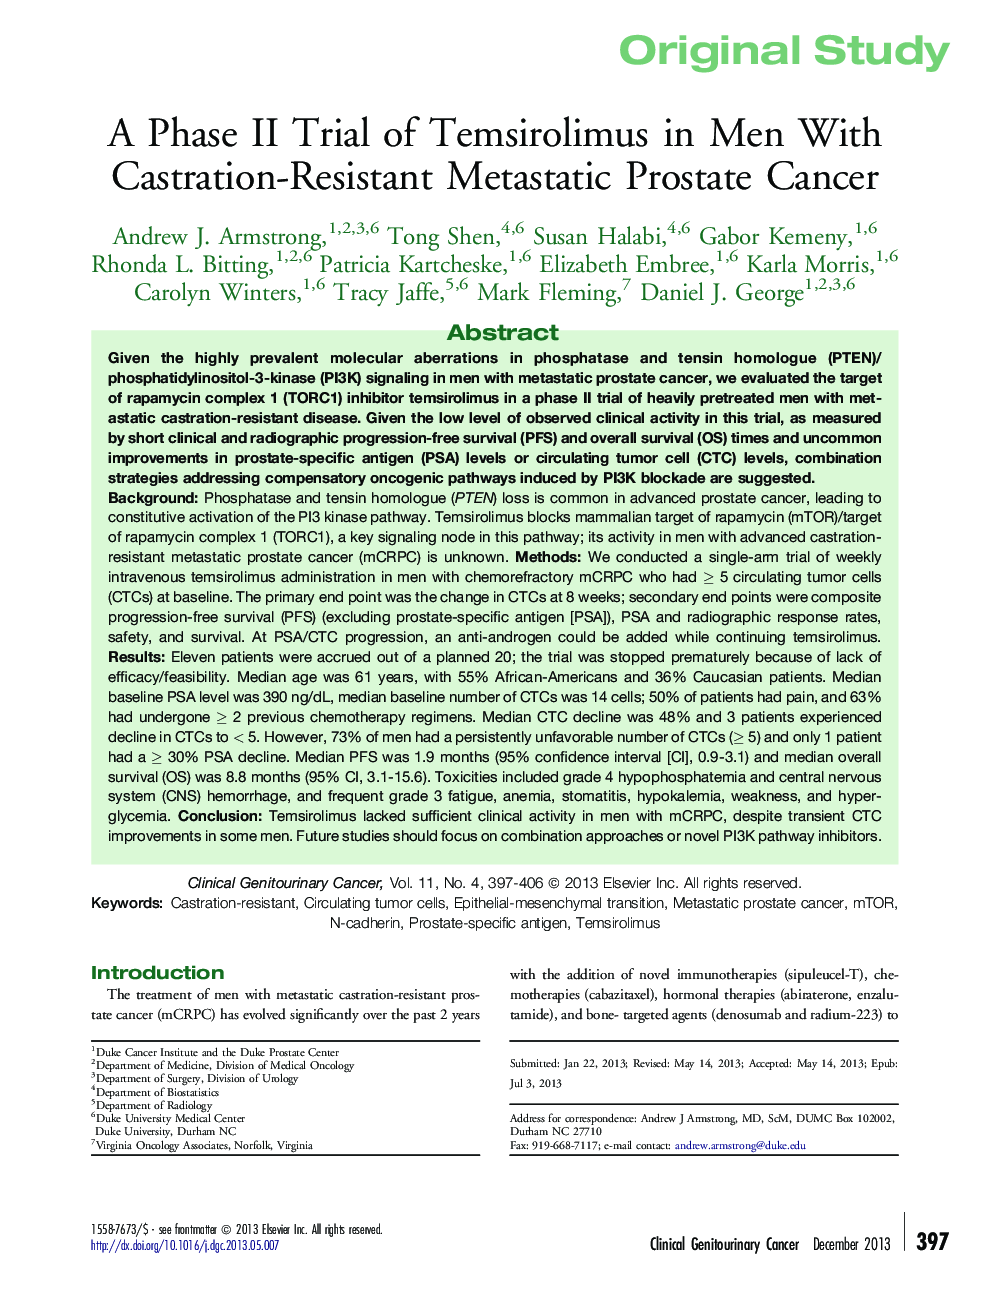 A Phase II Trial of Temsirolimus in Men With Castration-Resistant Metastatic Prostate Cancer